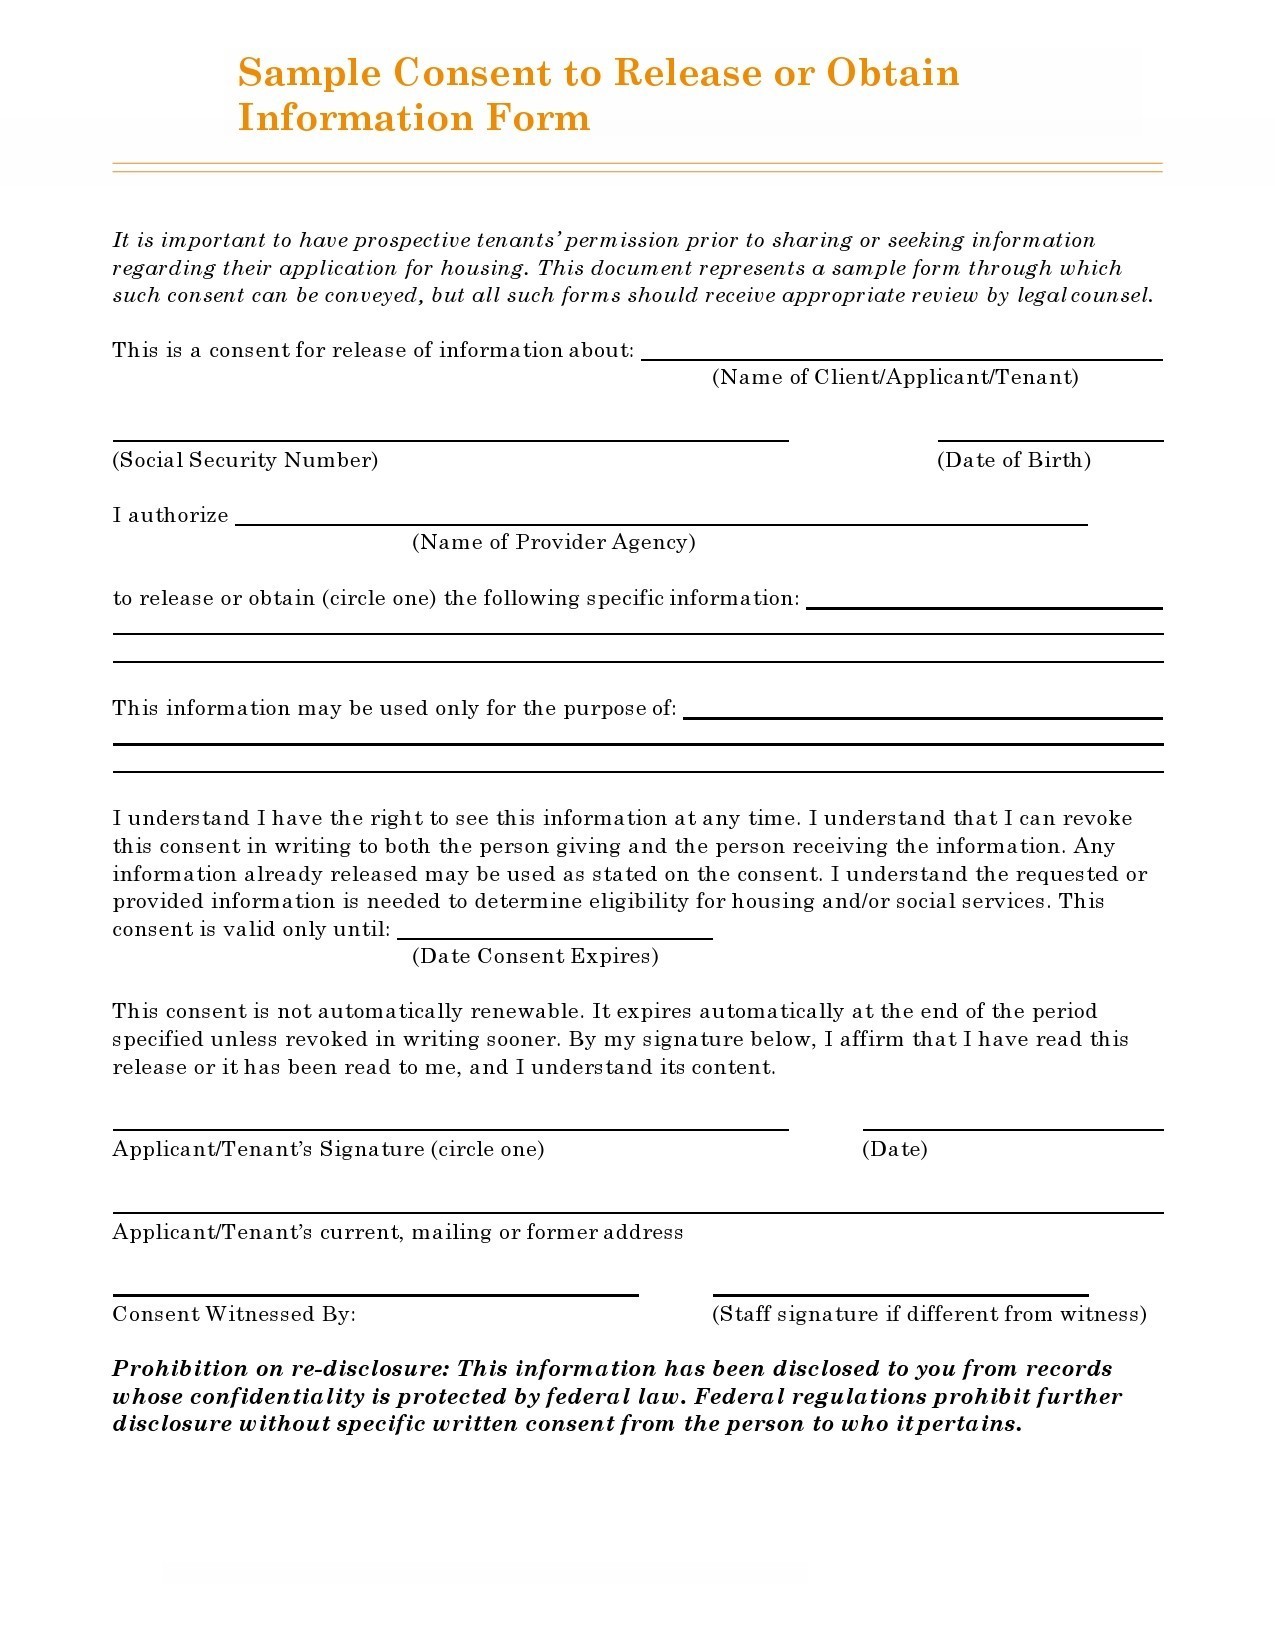 Free personal information form 23